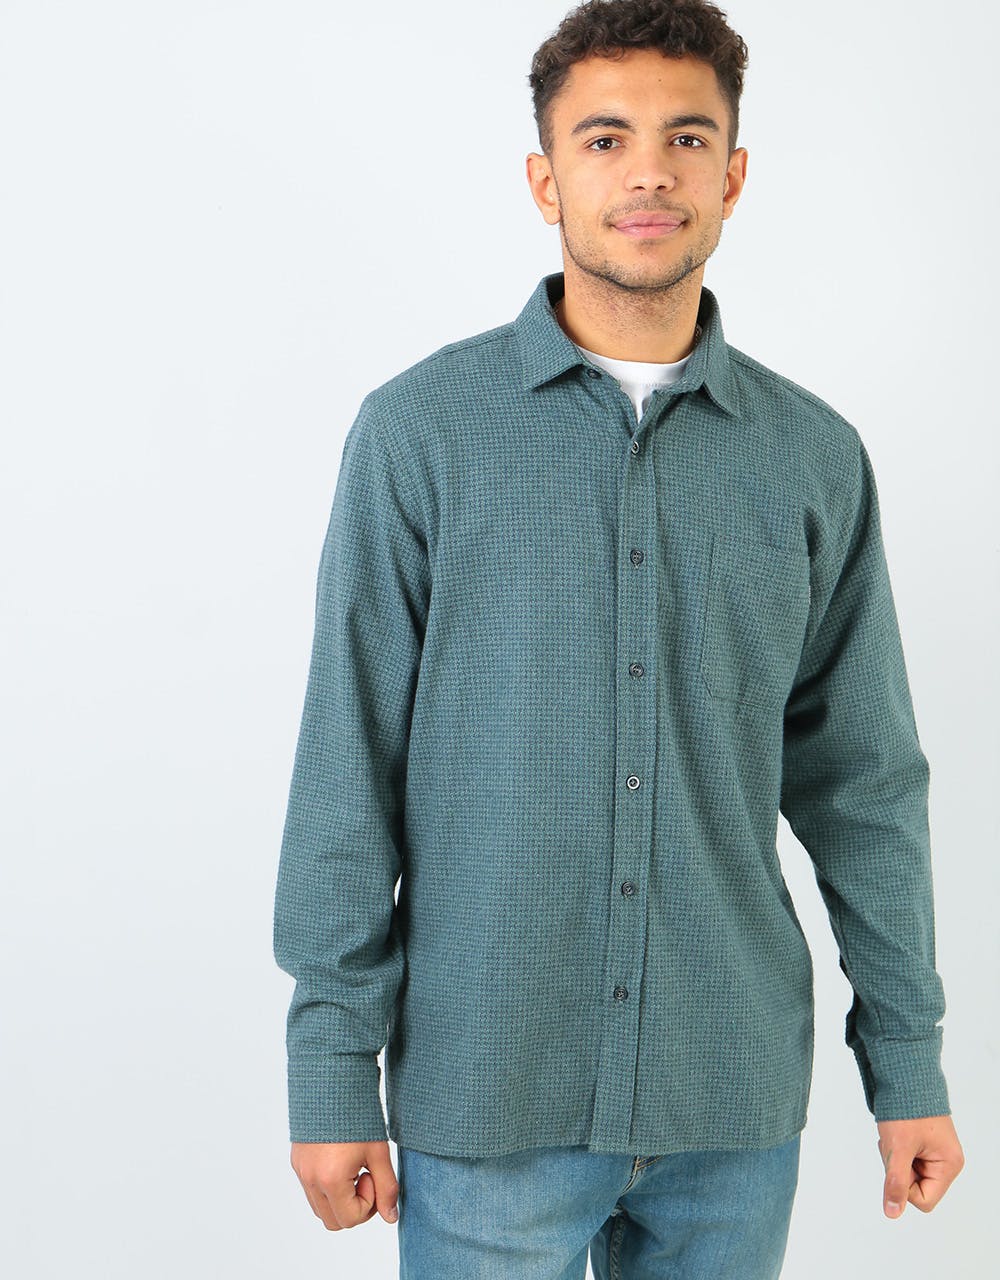 Route One Hounds Flannel Shirt - Seagrass